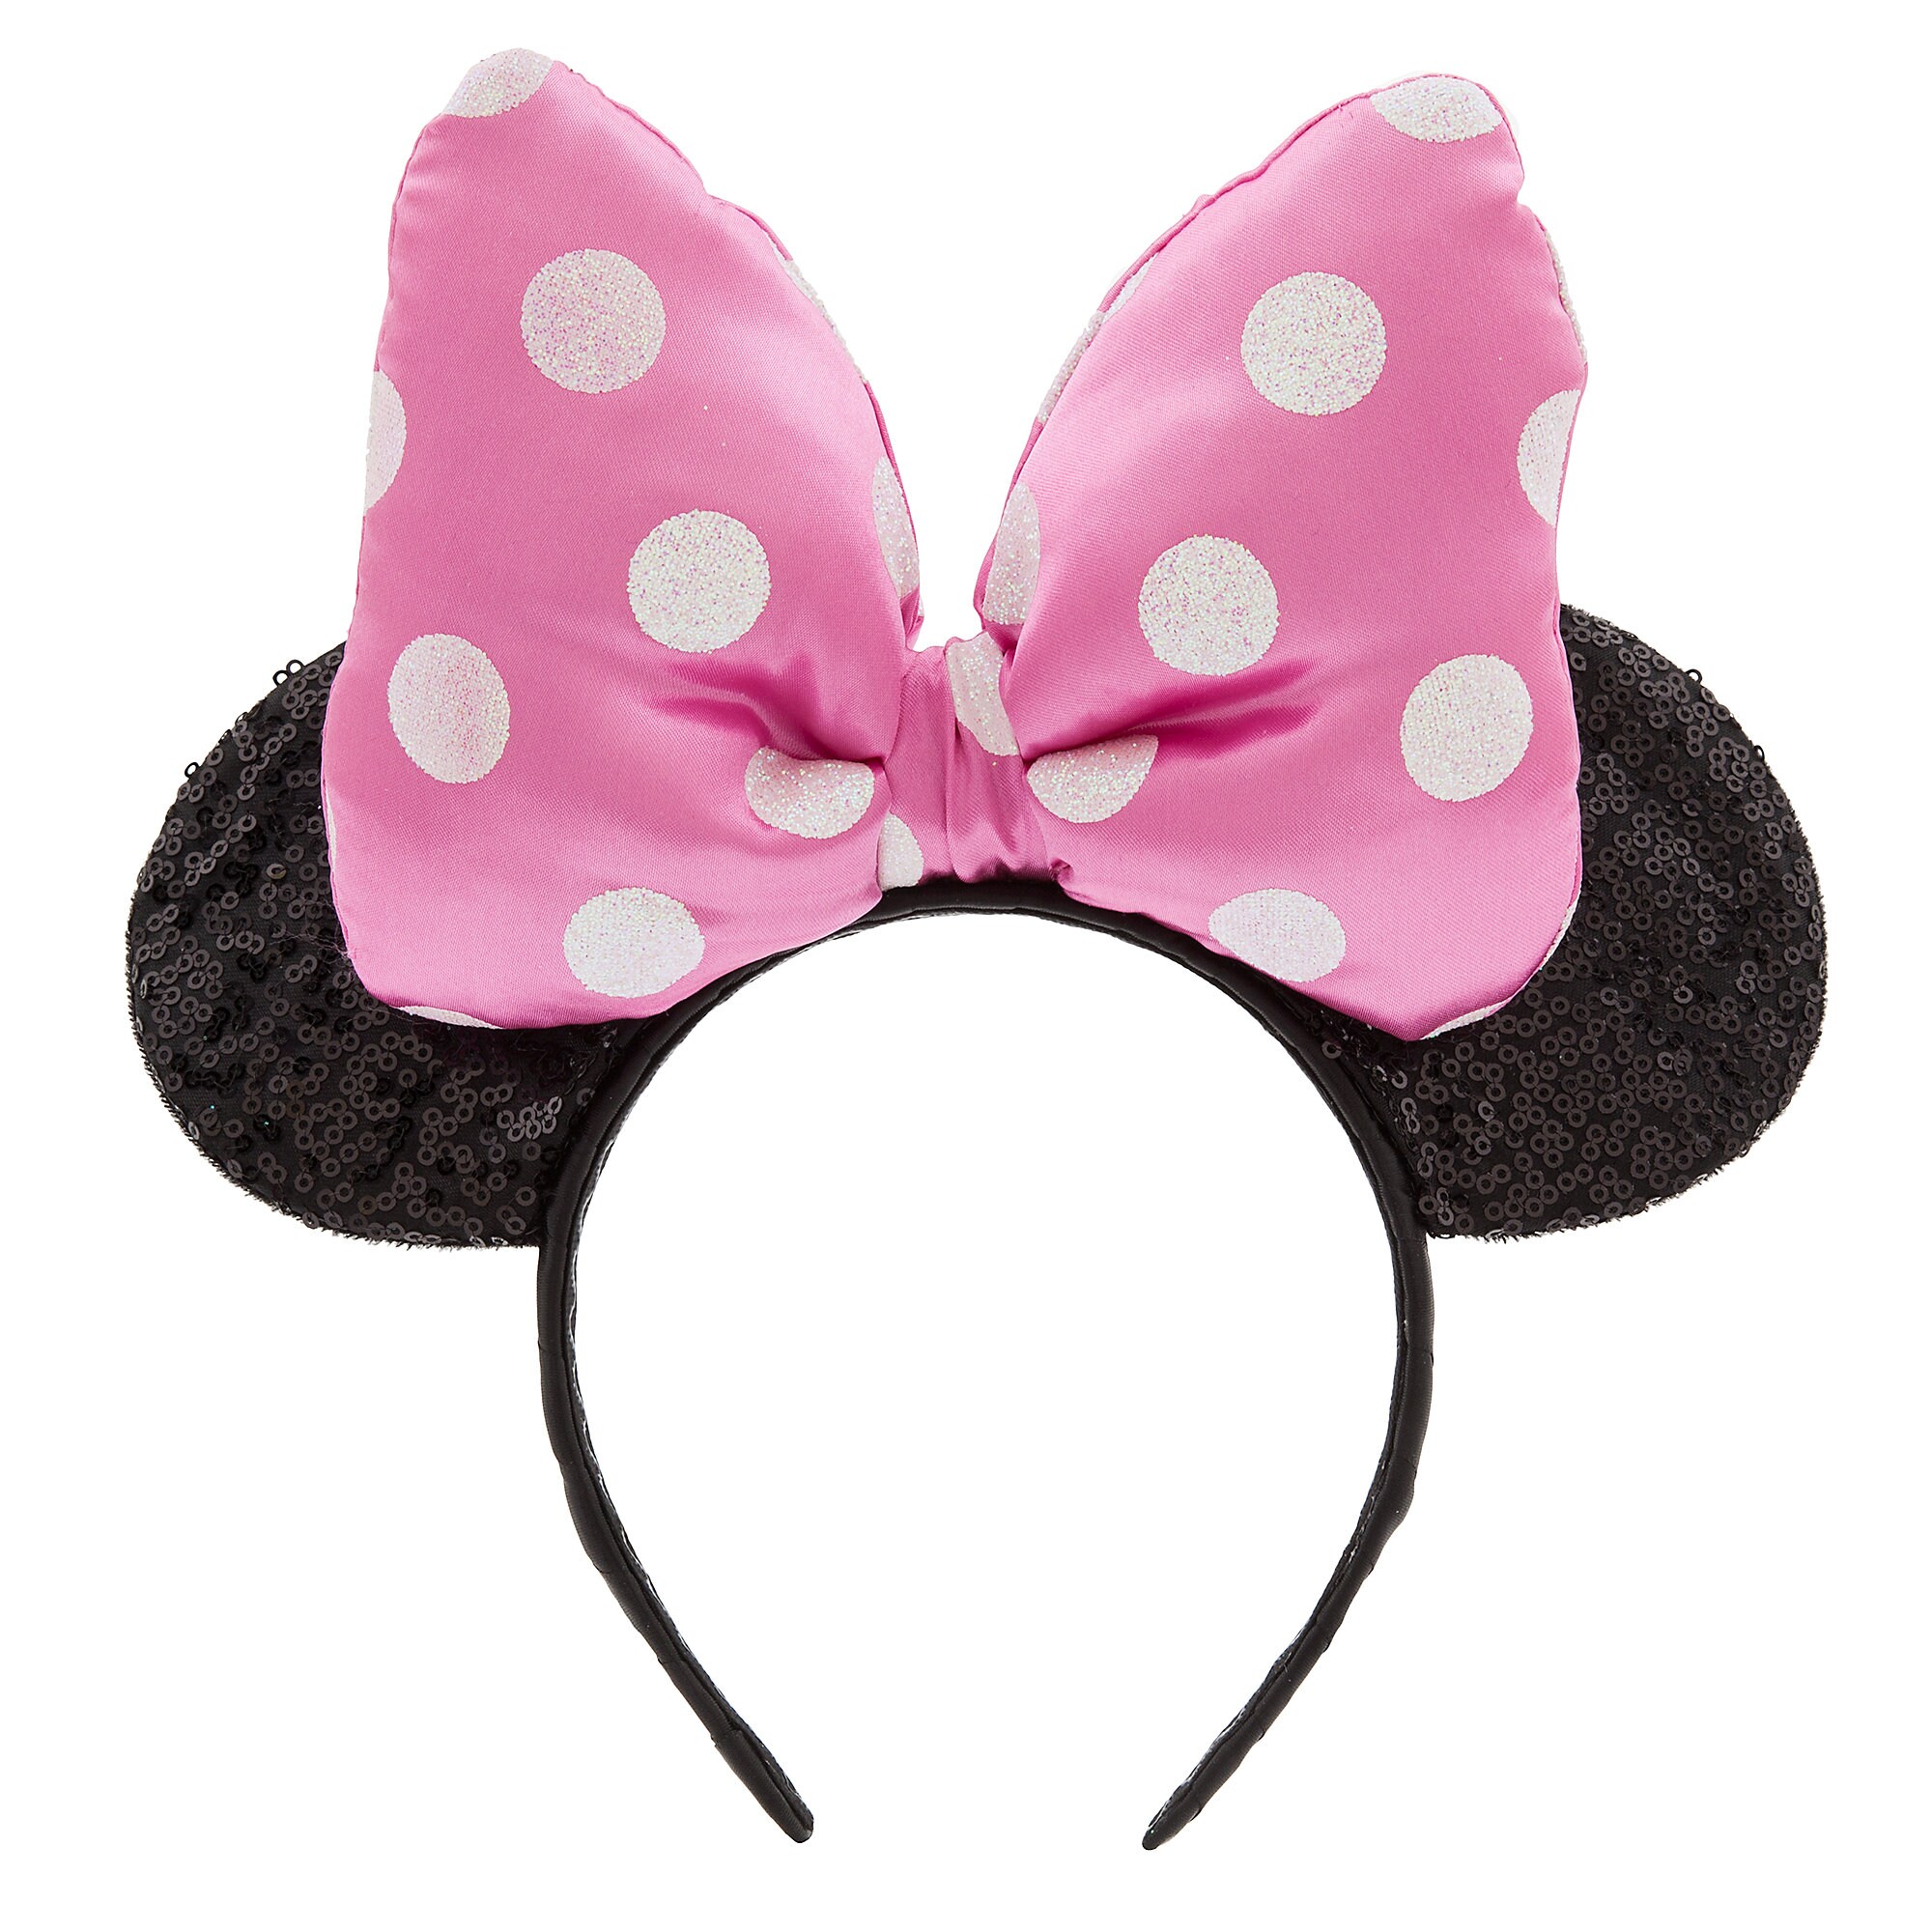 Minnie Mouse Ear Headband for Kids - Pink